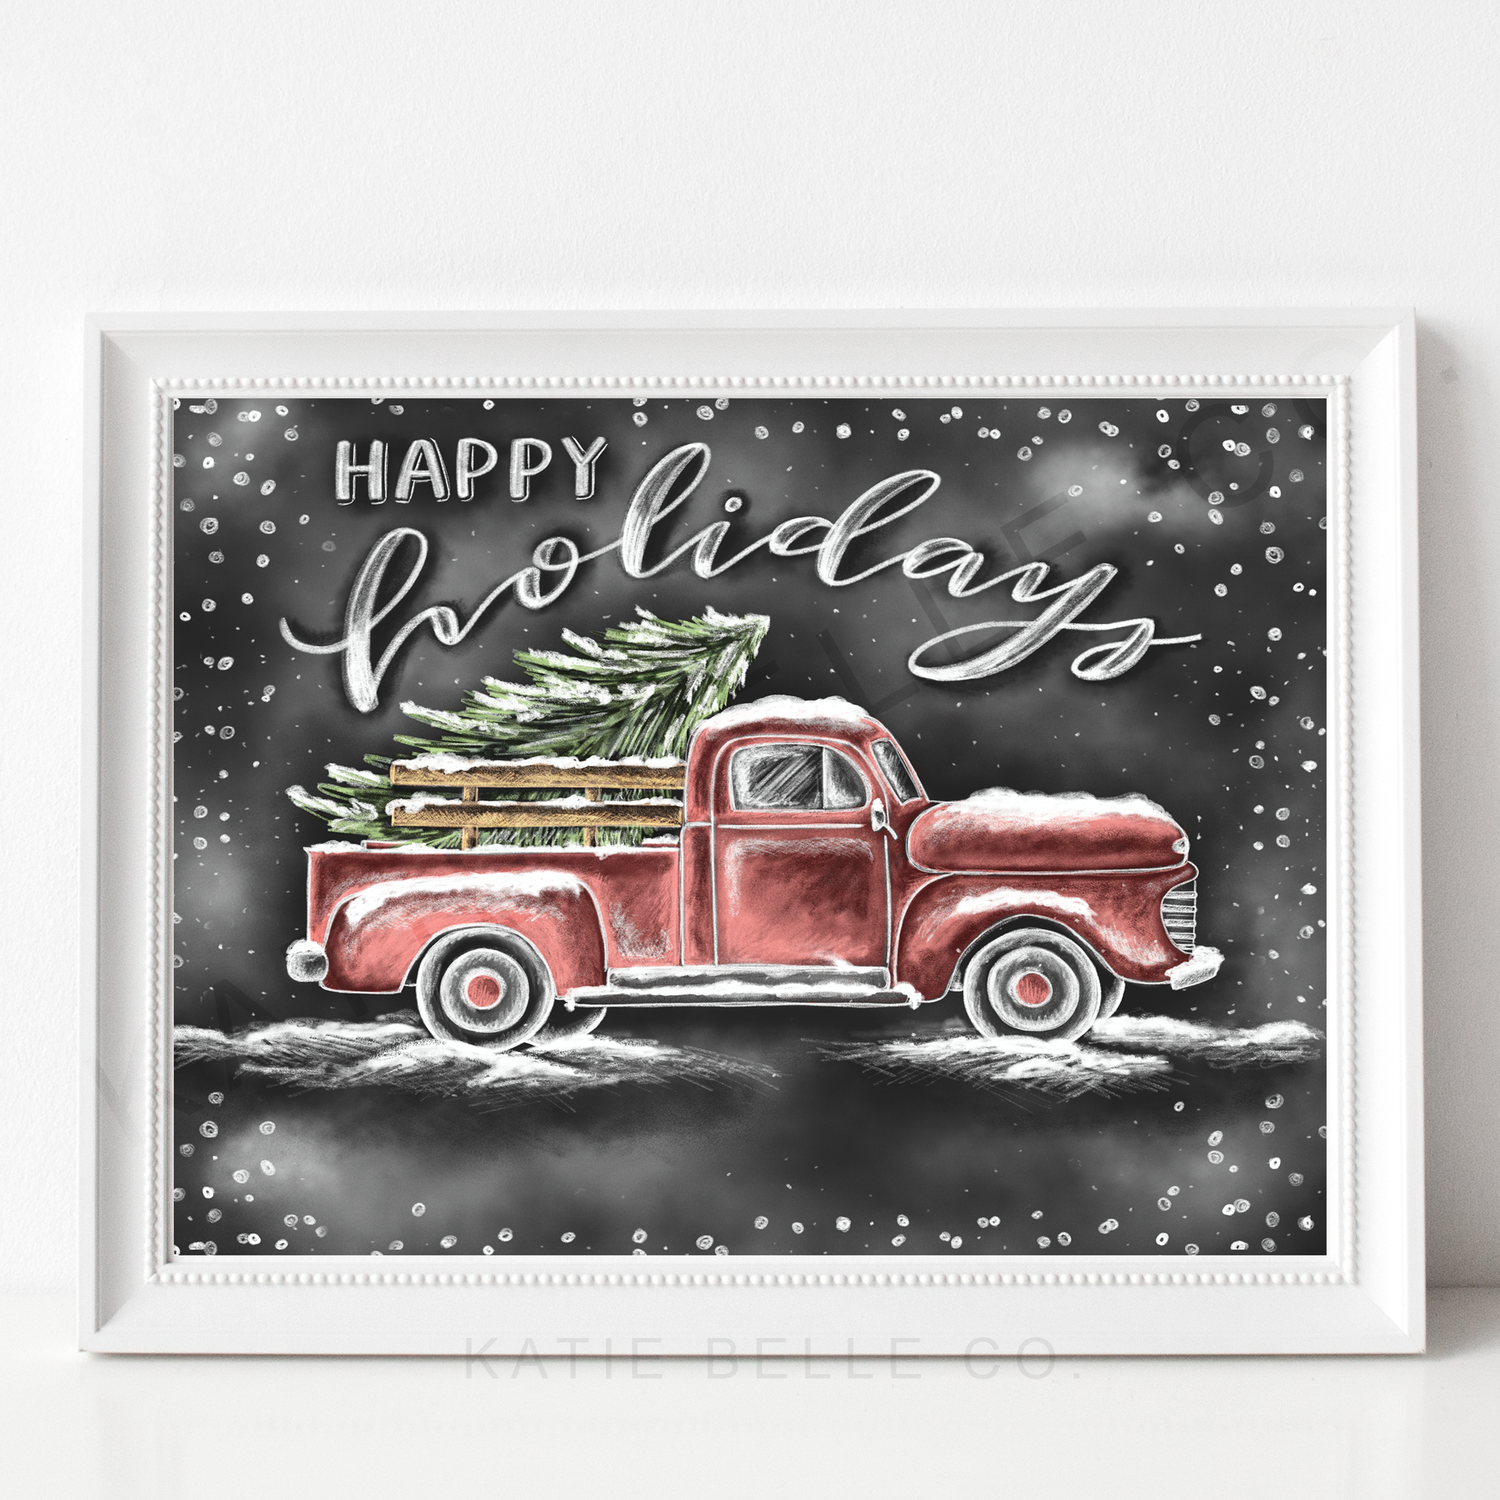 Snowy Holiday Truck. Vintage Red Truck. Happy Holidays. Chalkboard Art. Katie Belle Co. Christmas Decor. Christmas Artwork. Holiday Home Decor.